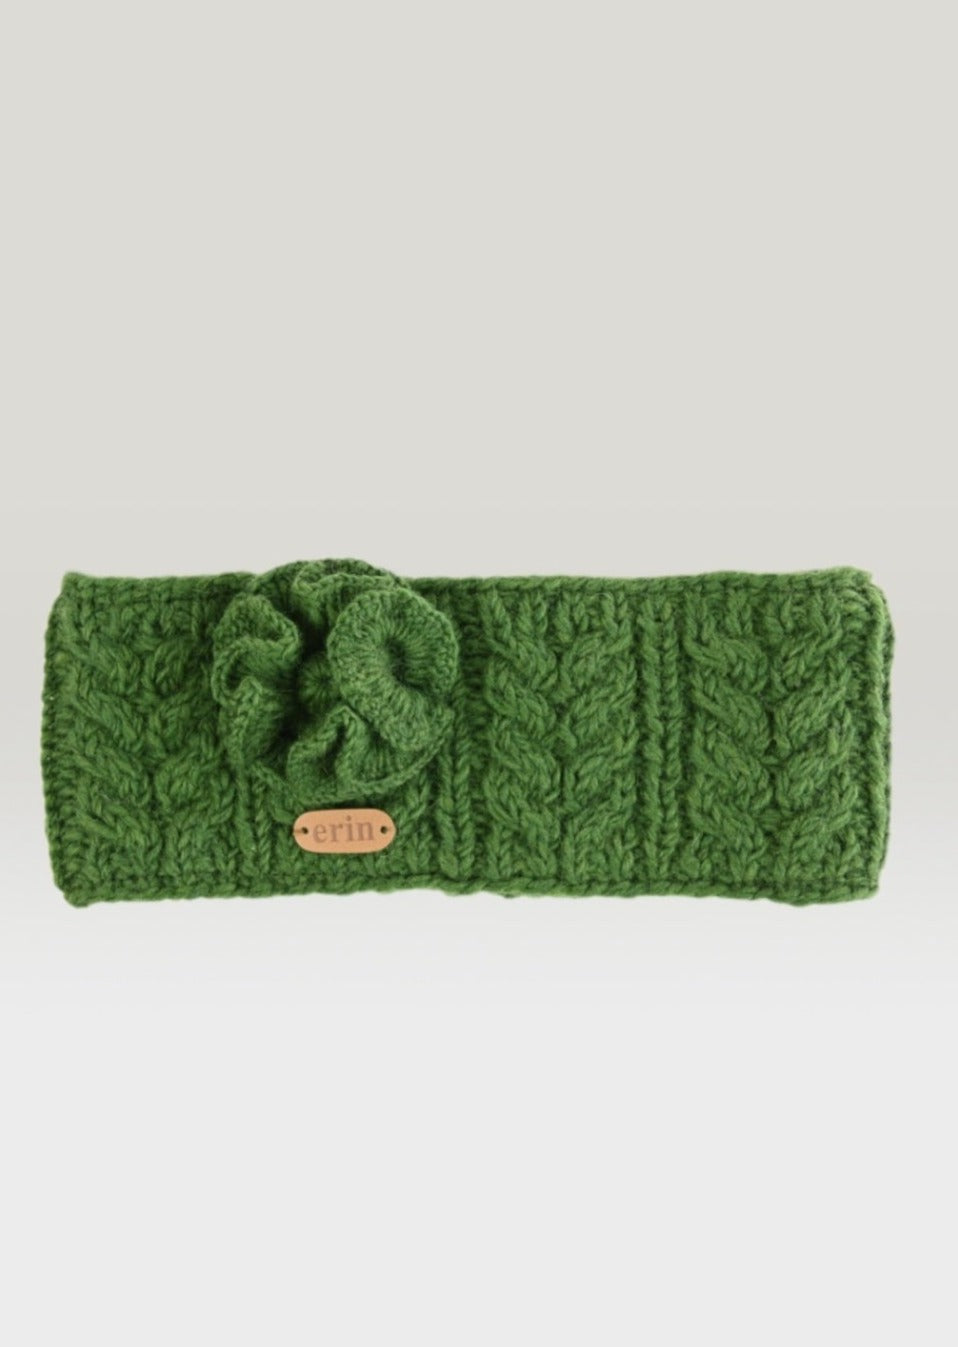 Aran Cable Knitted Wool Flower Headband | Green